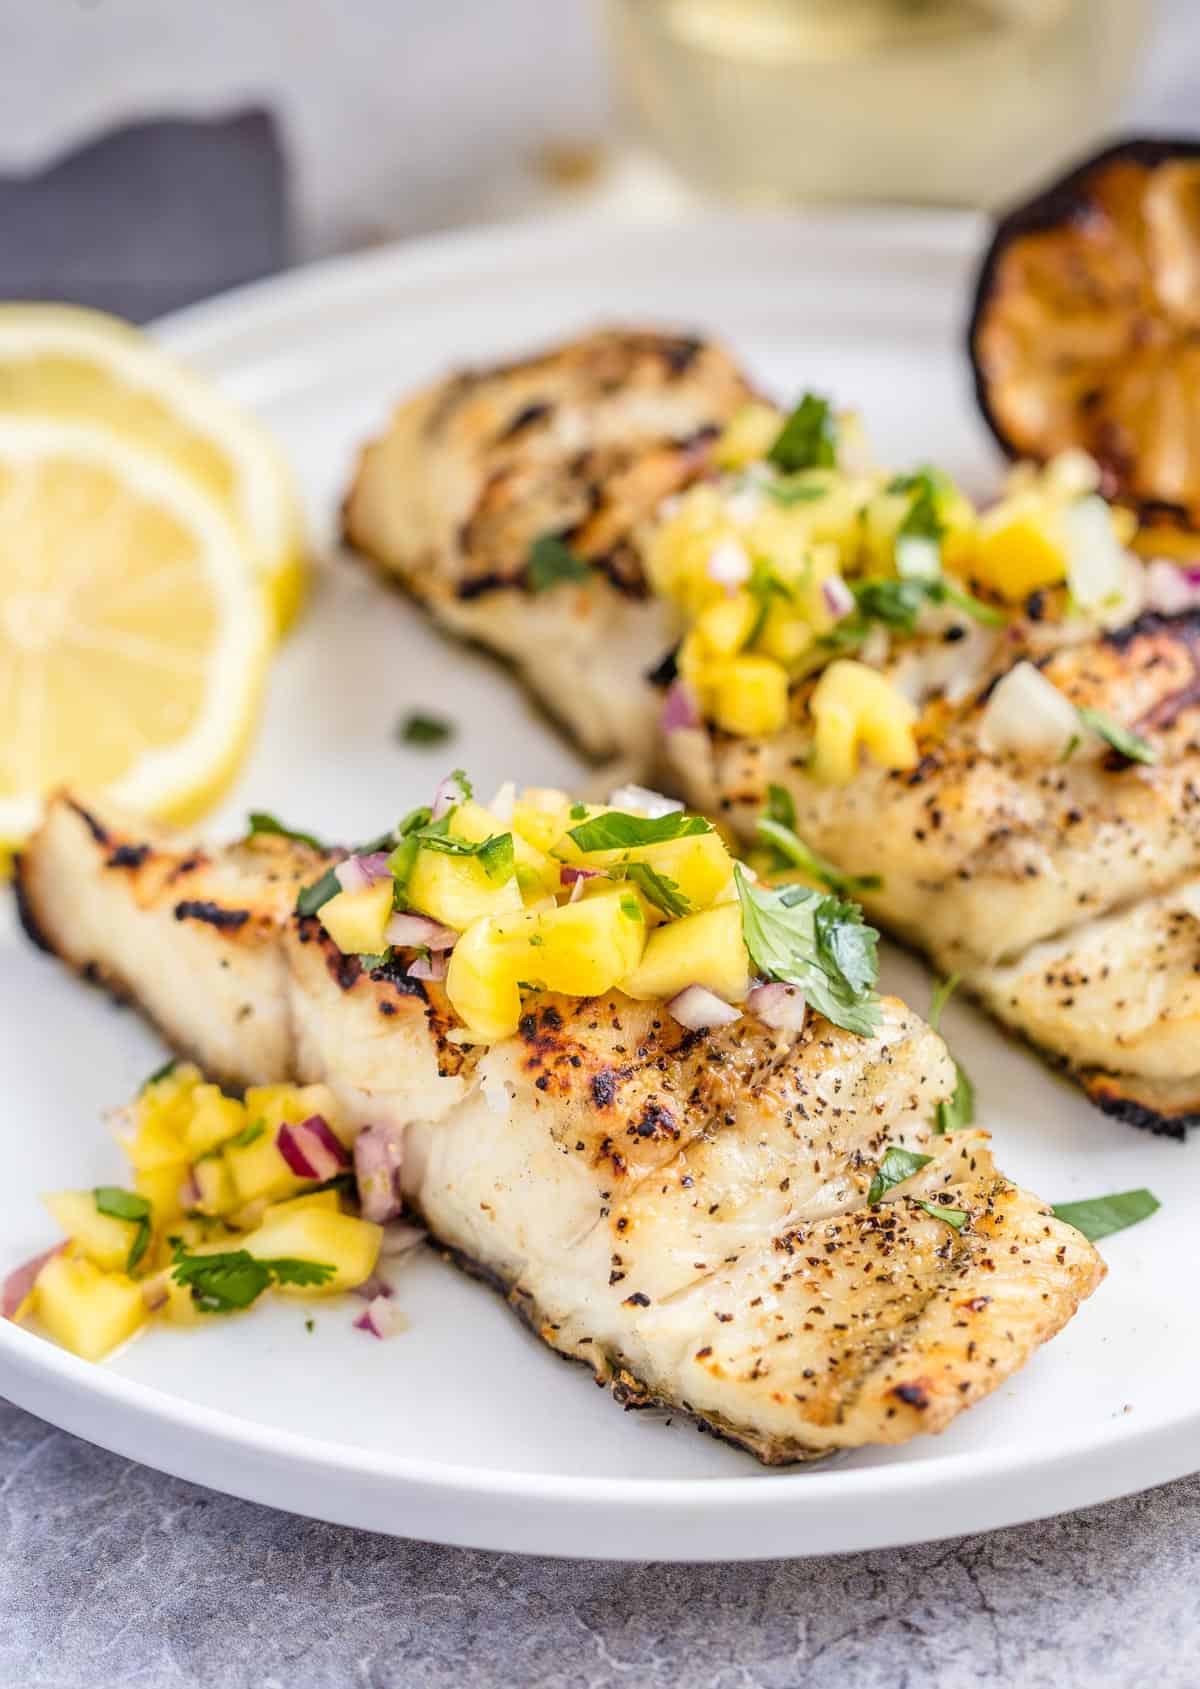 Two Grilled Halibut filets on a white plate and topped with a Mango Citrus Salsa